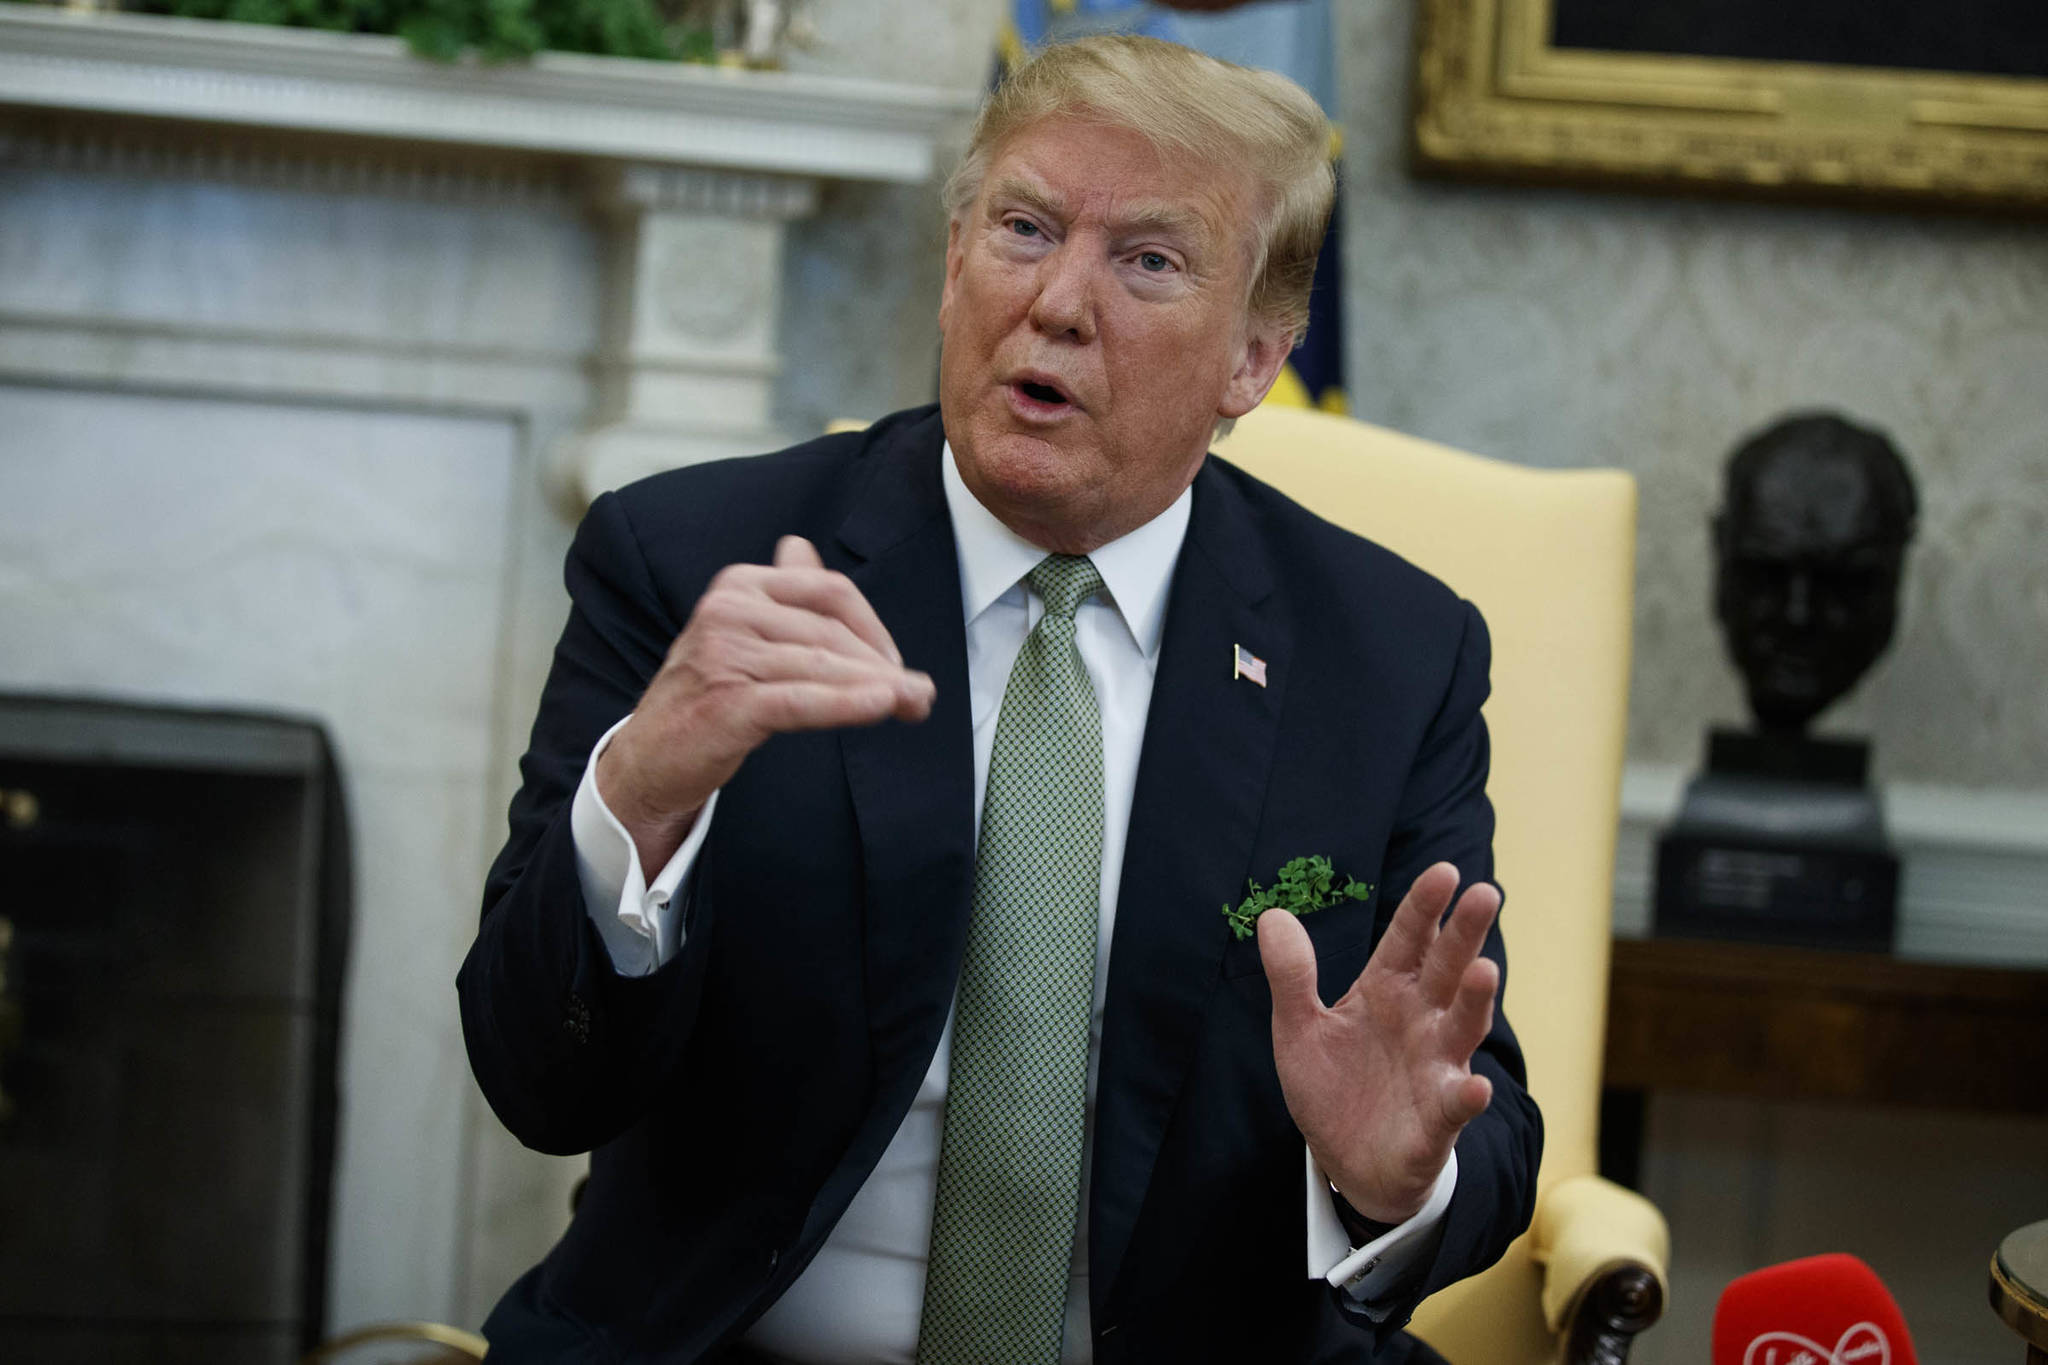 President Donald Trump speaks during a meeting with Irish Prime Minister Leo Varadkar in the Oval Office of the White House on Thursday, March 14, 2019, in Washington, D.C. (Evan Vucci | Associated Press)